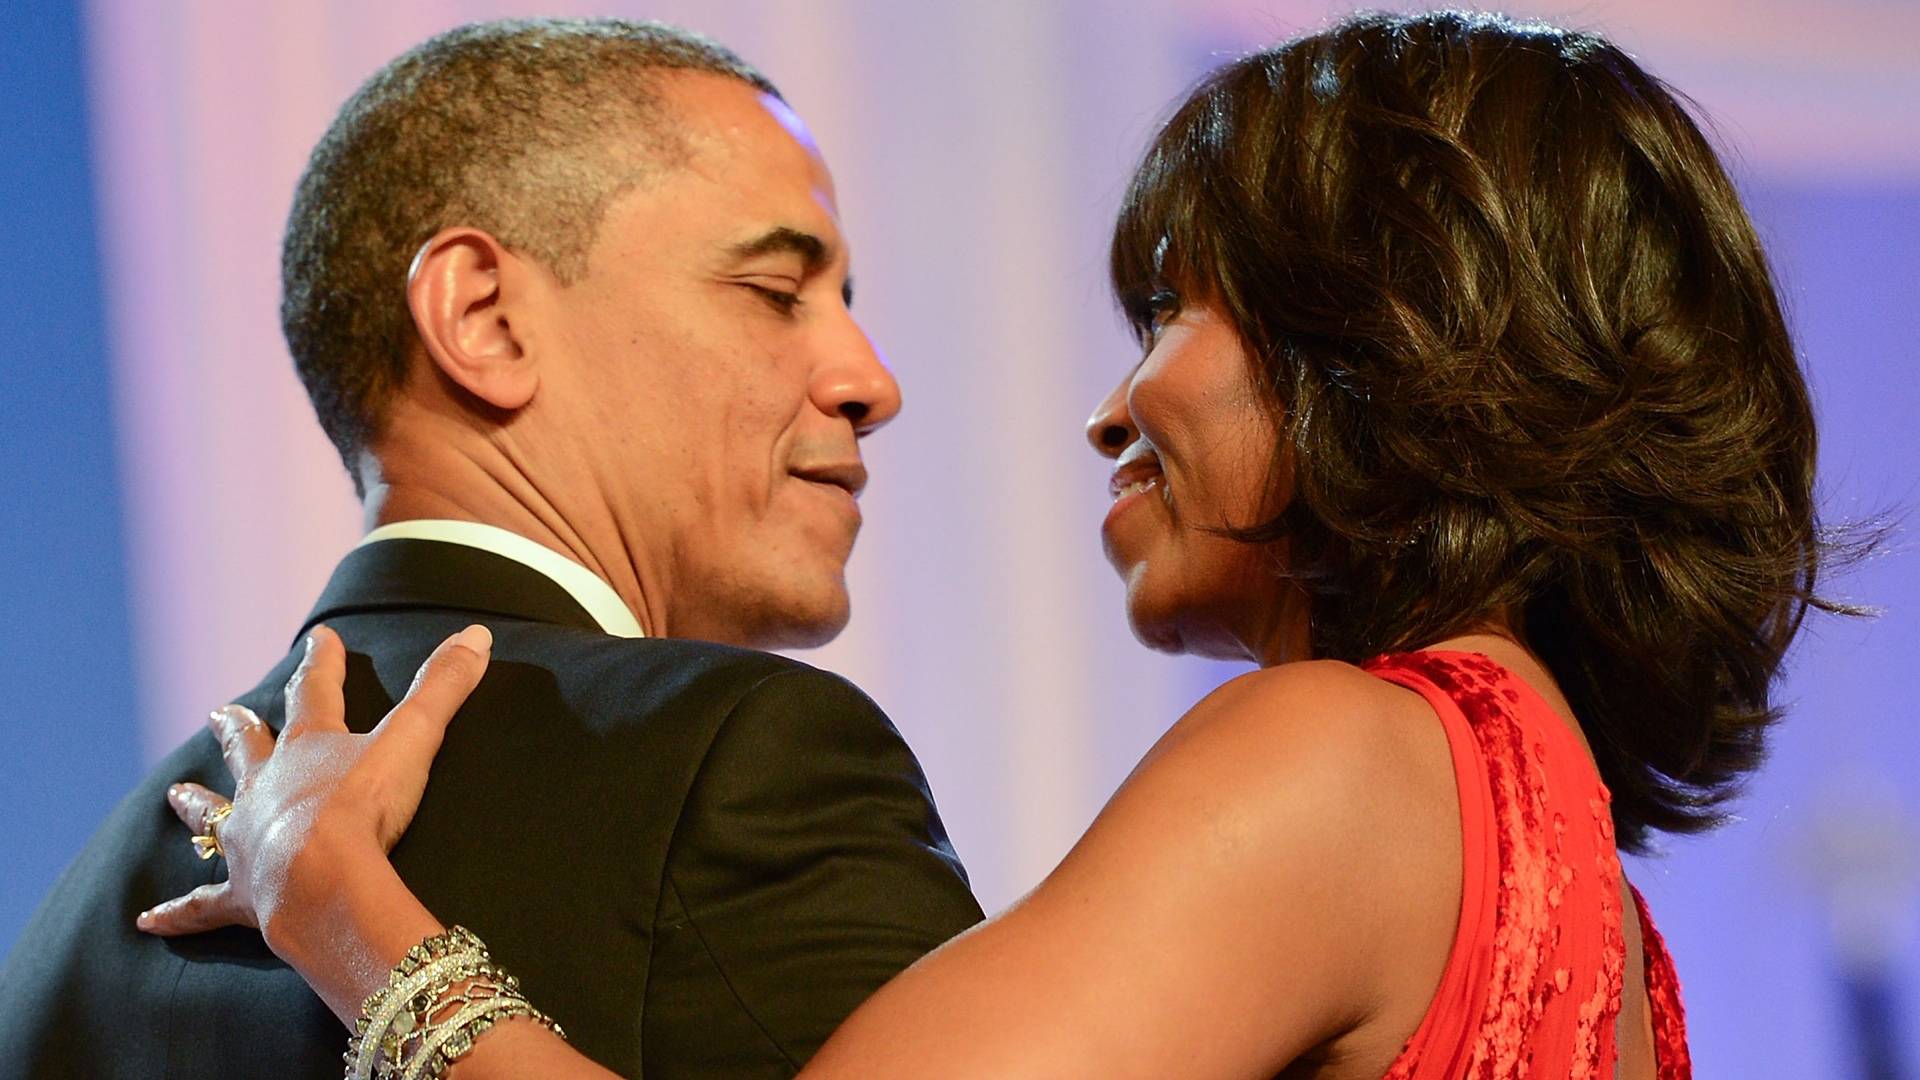 Barack and Michelle Obama on BET Buzz 2020.